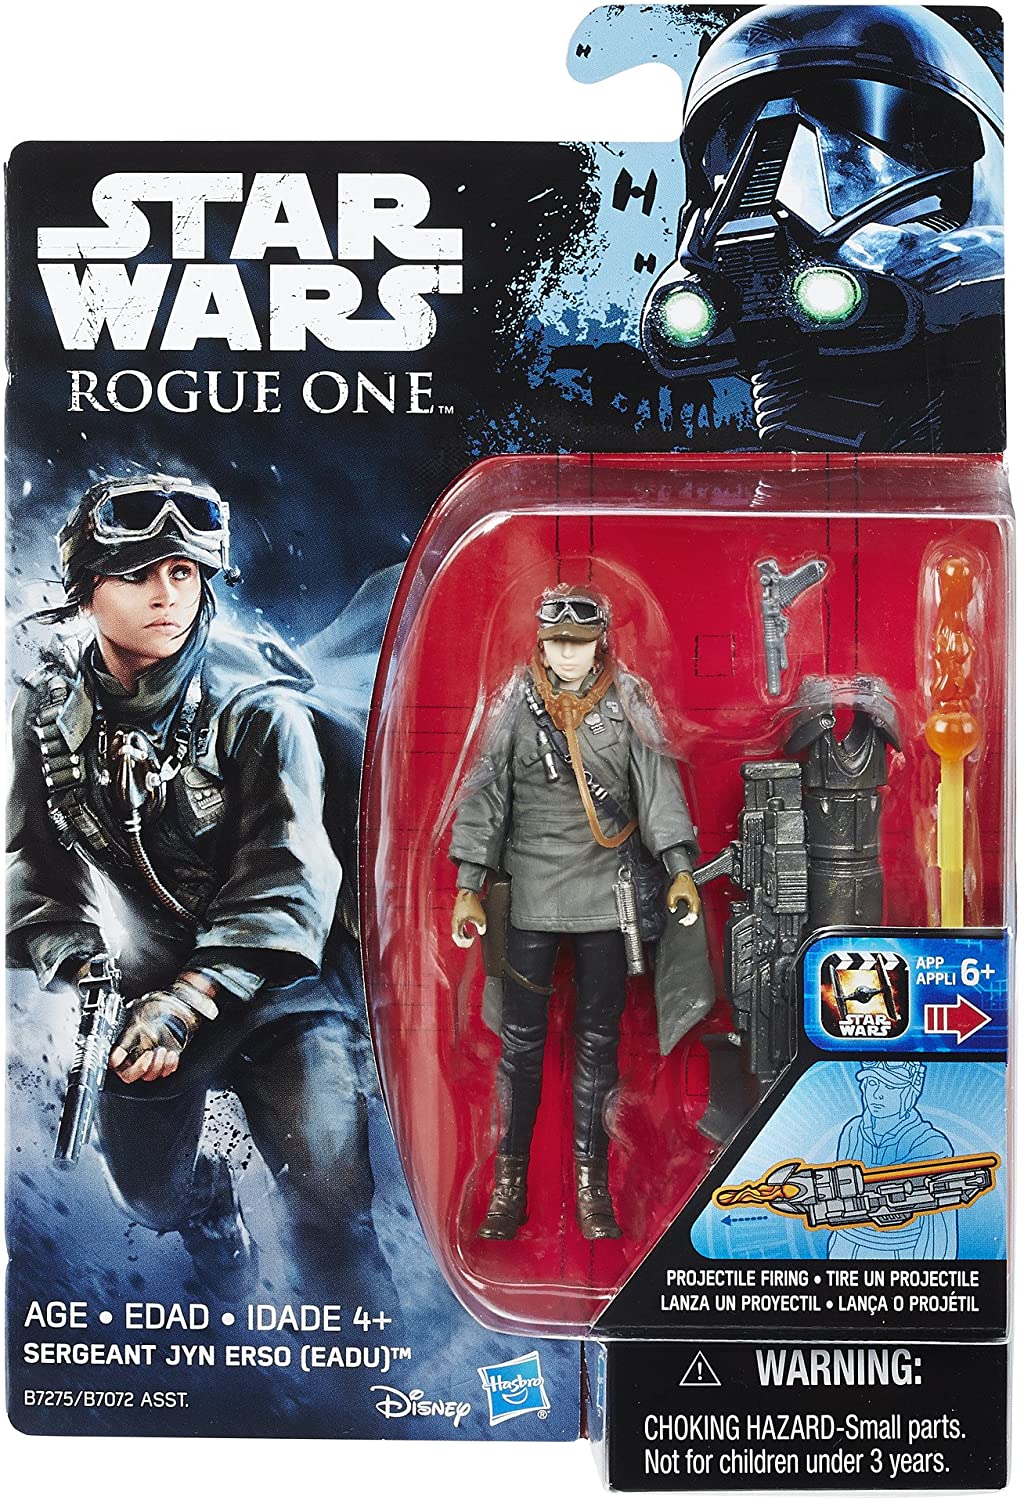 Star Wars Rogue One Sergeant Jyn Erso 3.75" Action Figure